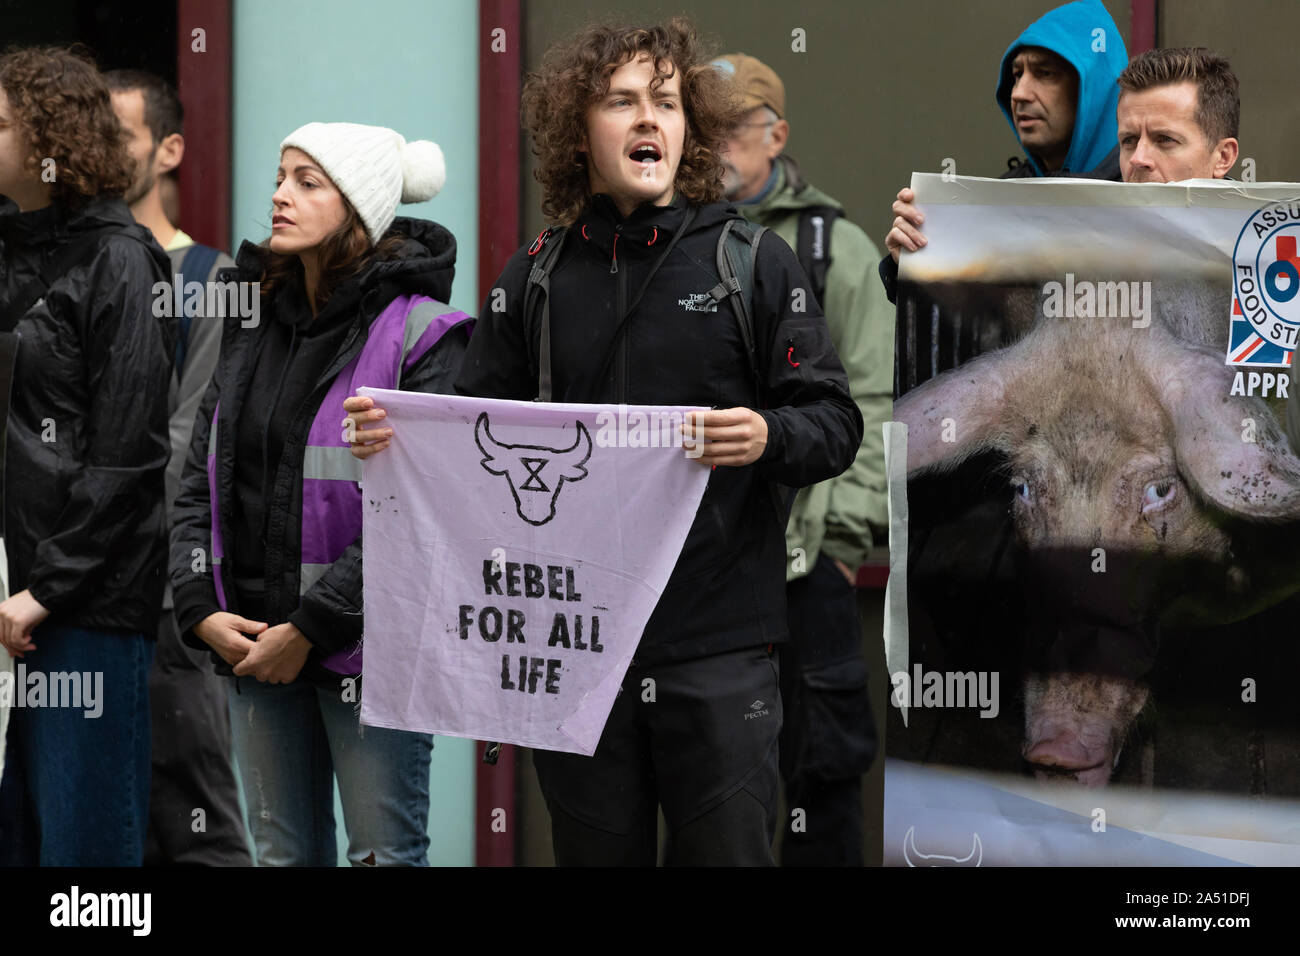 London. UK. 17 October 2019. Extinction Rebellion protesters from the Animal Rebellion vegan wing demonstrate outside and opposite the offices of the Red Tractor Assurance offices in central London. The Red Tractor is a food assurance scheme that looks at production standards on safety, hygiene, animal welfare and food production. Credit: Alamy Live News Stock Photo